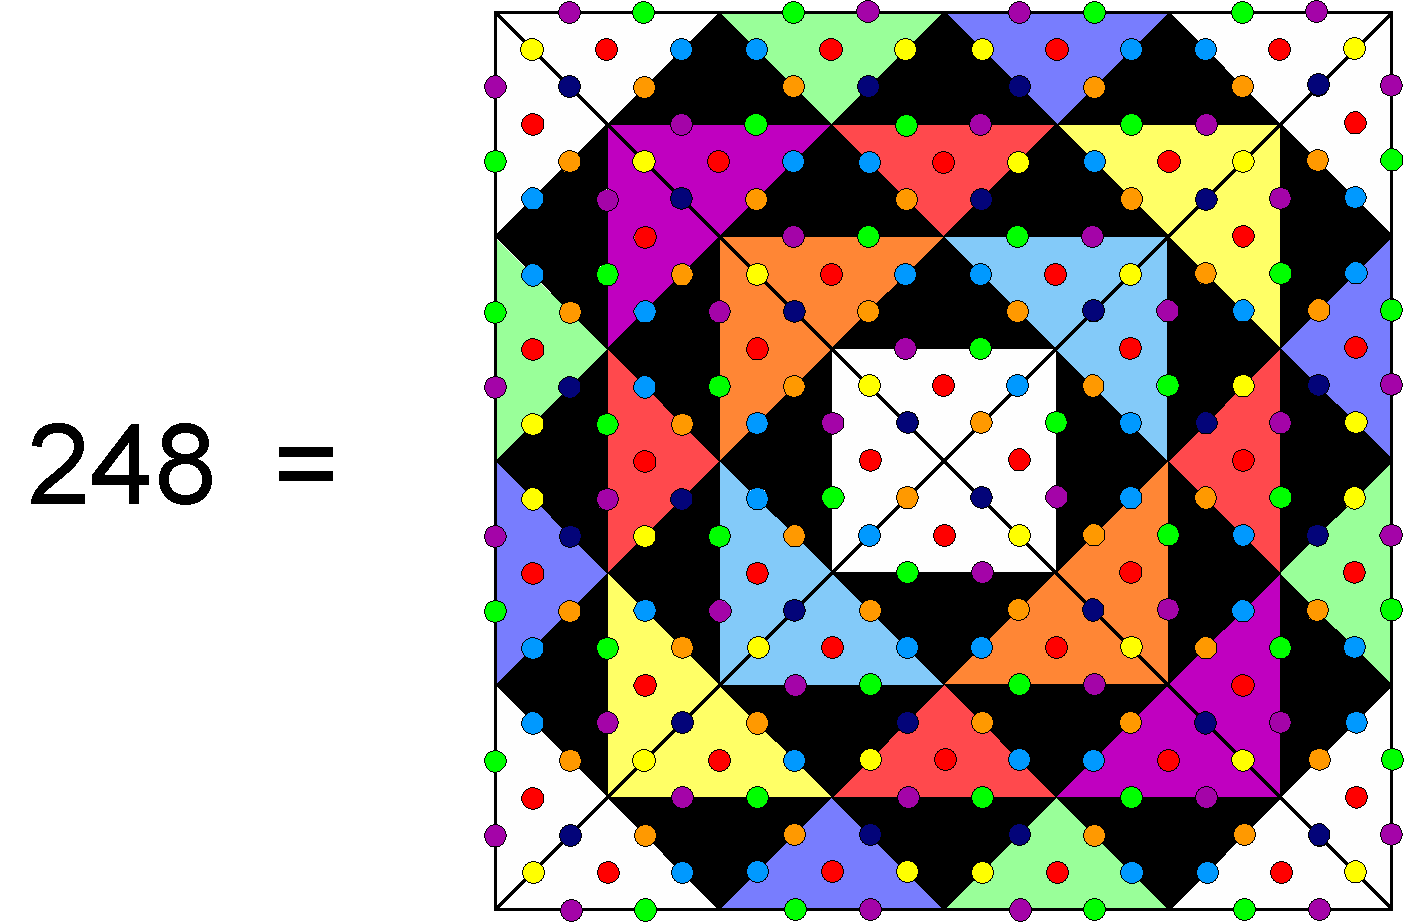 248 hexagonal yods in square